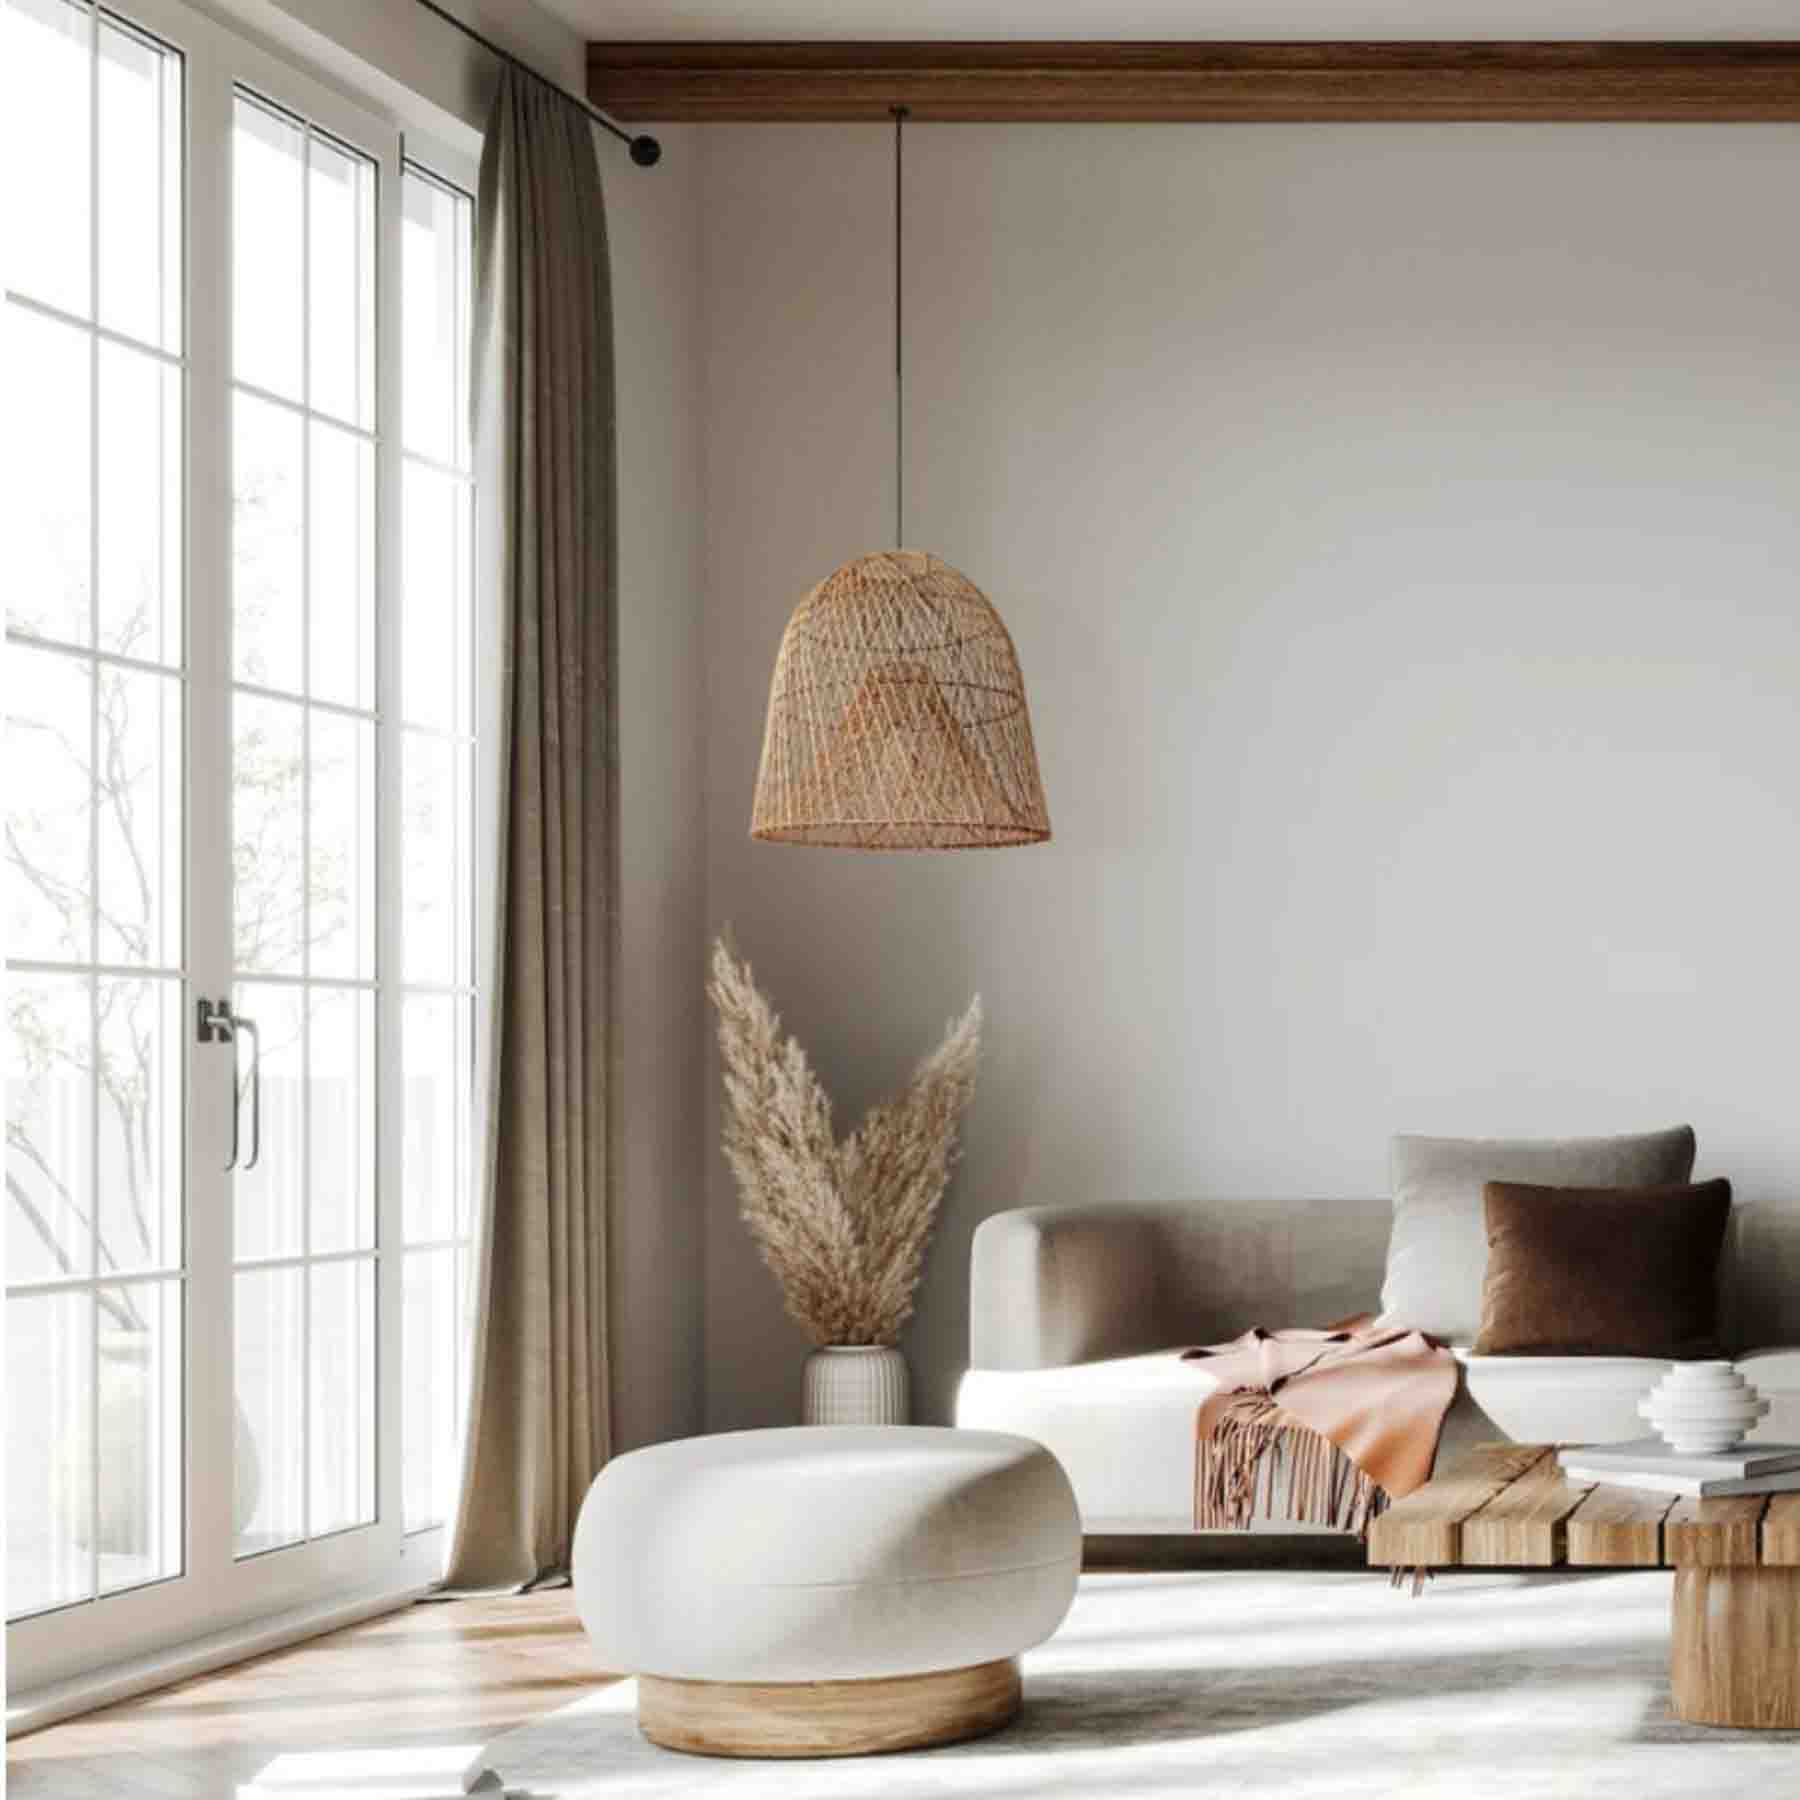 santa barbara offers sophisticated lighting in a smaller size